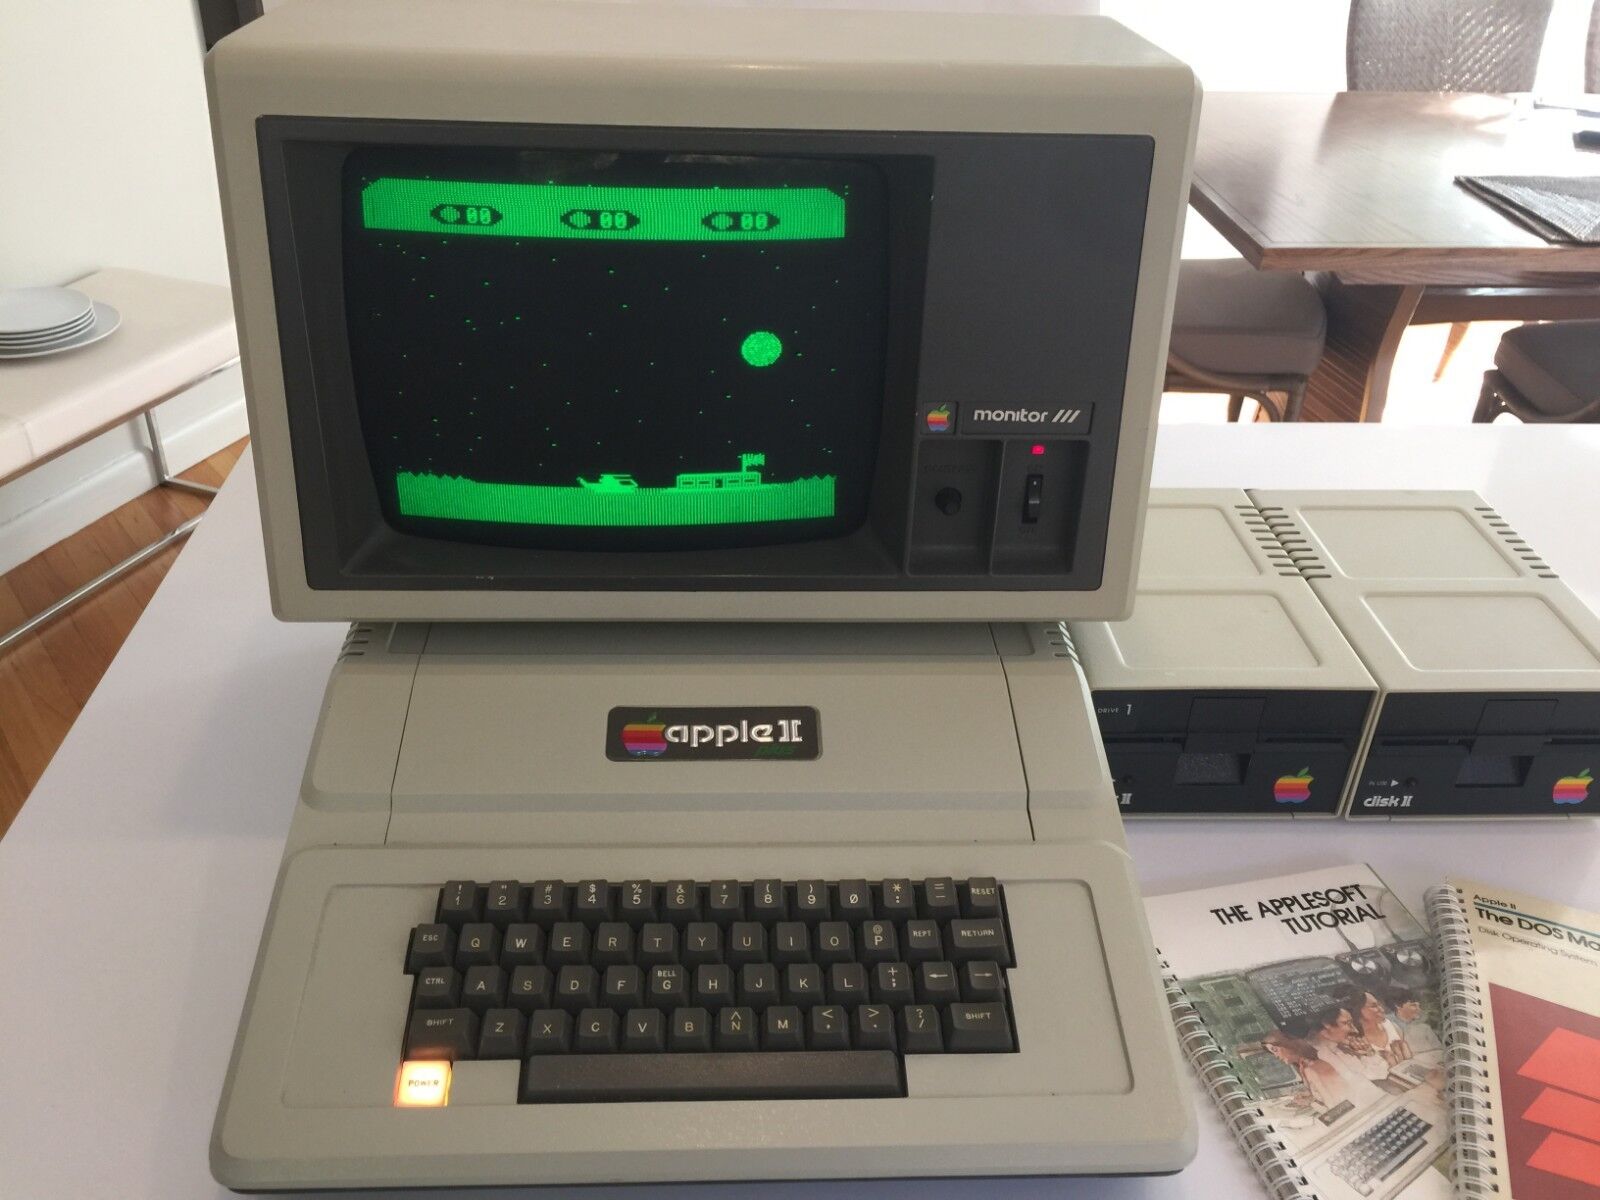 Vintage Apple II+ Computer A2S1048 w/ 2 disk drives, Apple monitor III - manuals